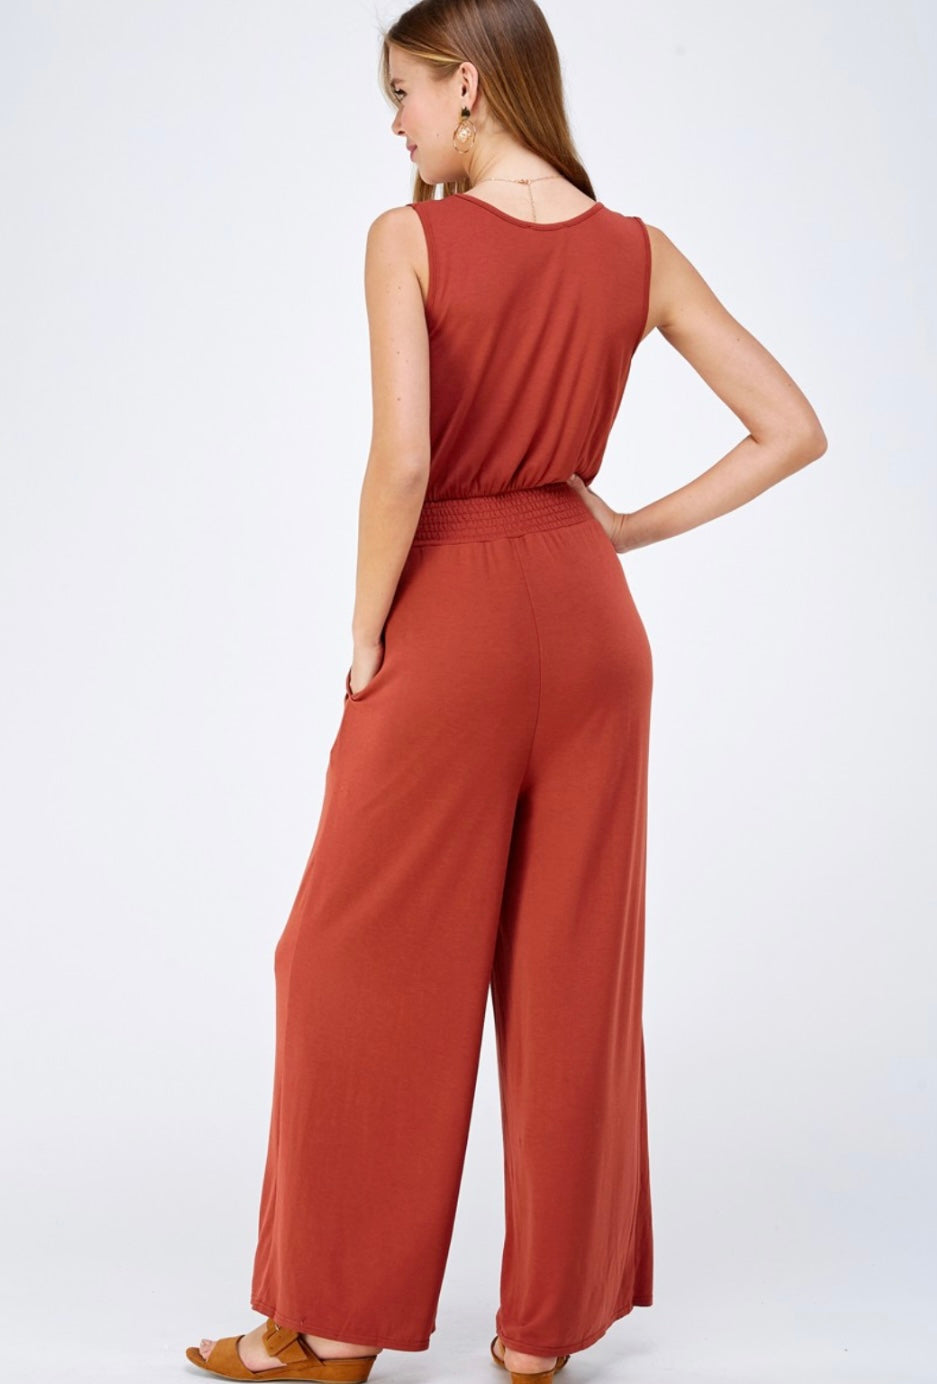 Knit Solid Sleeveless Jumpsuit